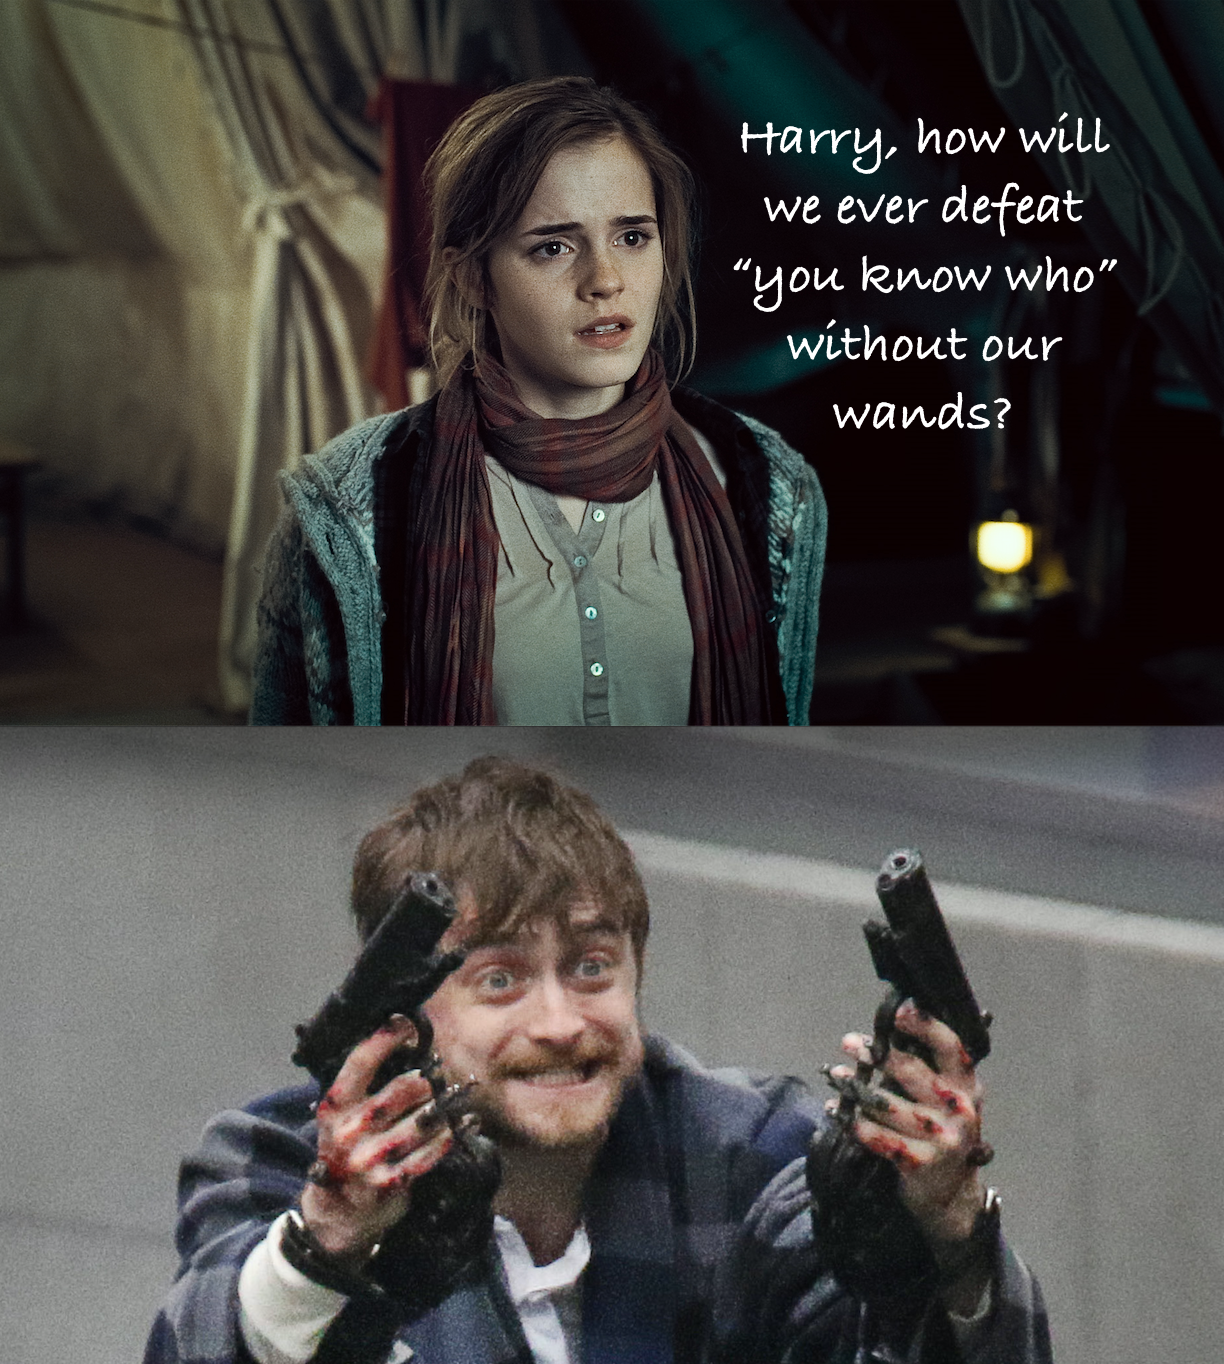 harry potter with guns - Harry, how will we ever defeat "you know who" without our wands?